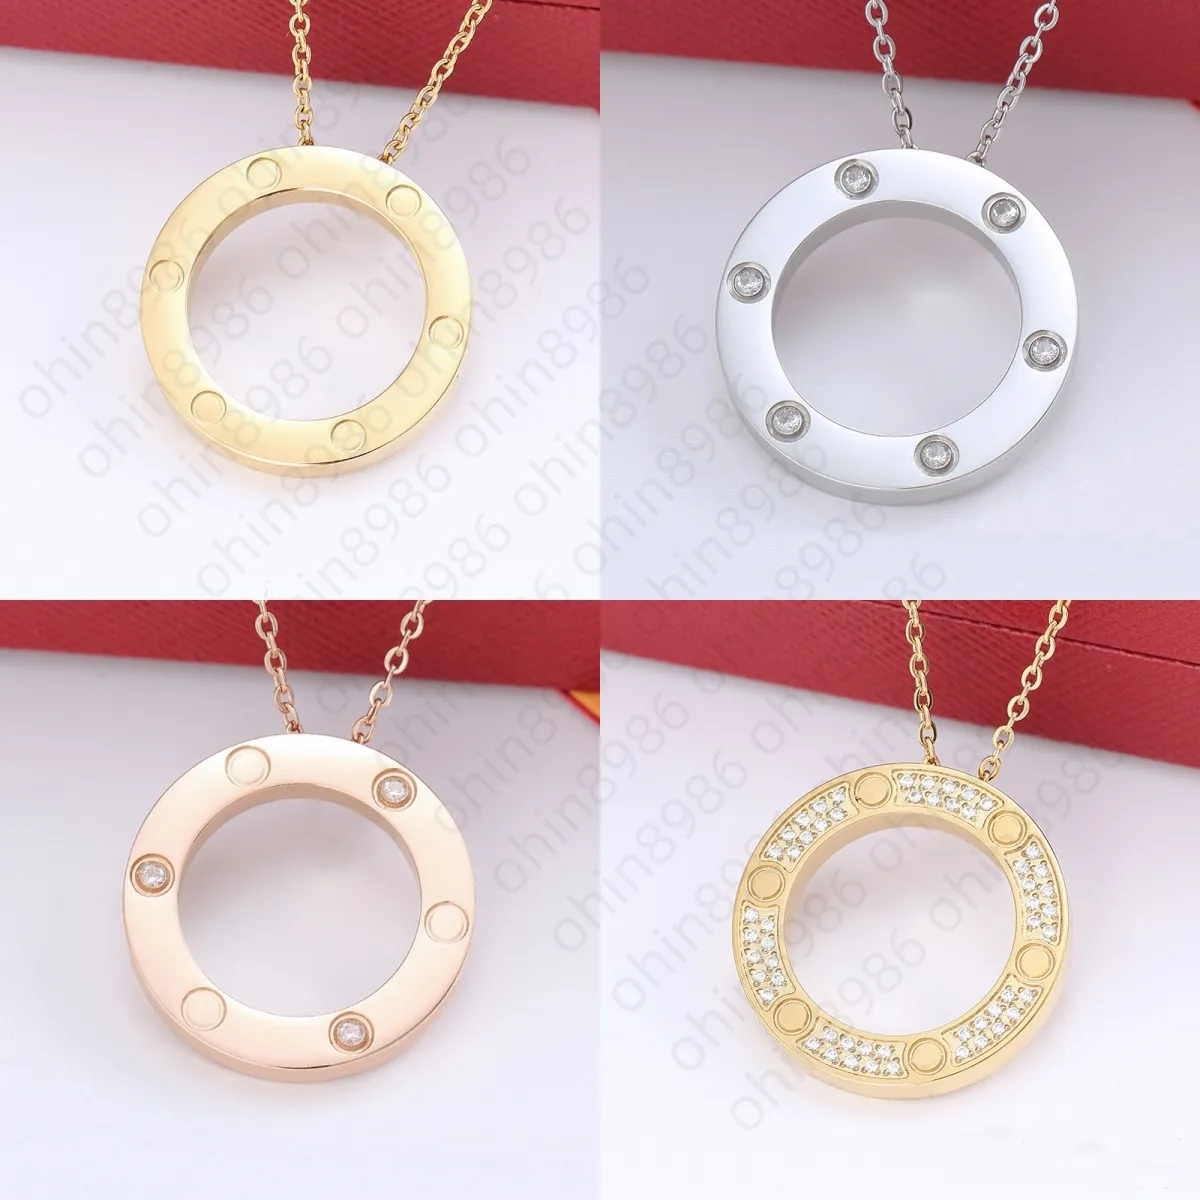 Designer Luxury Circle Love Necklace for Women Love Jewelry Diamond Chain Valentine Day Gift Necklaces Choker Chain Jewelry Accessories Non Fading